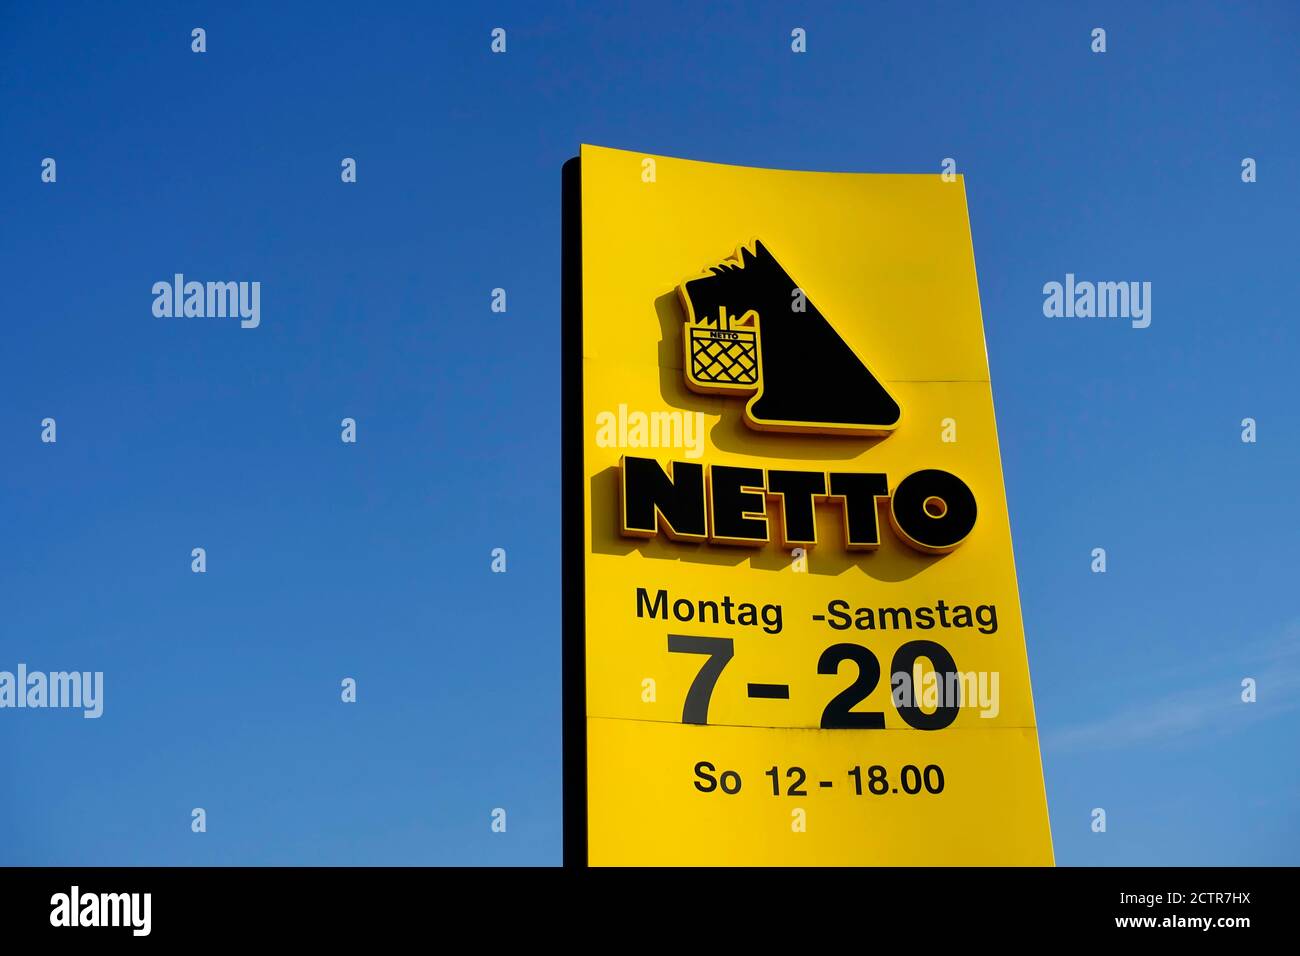 Netto, a Danish discount supermarket operating in Denmark, Germany, Poland Stock Photo